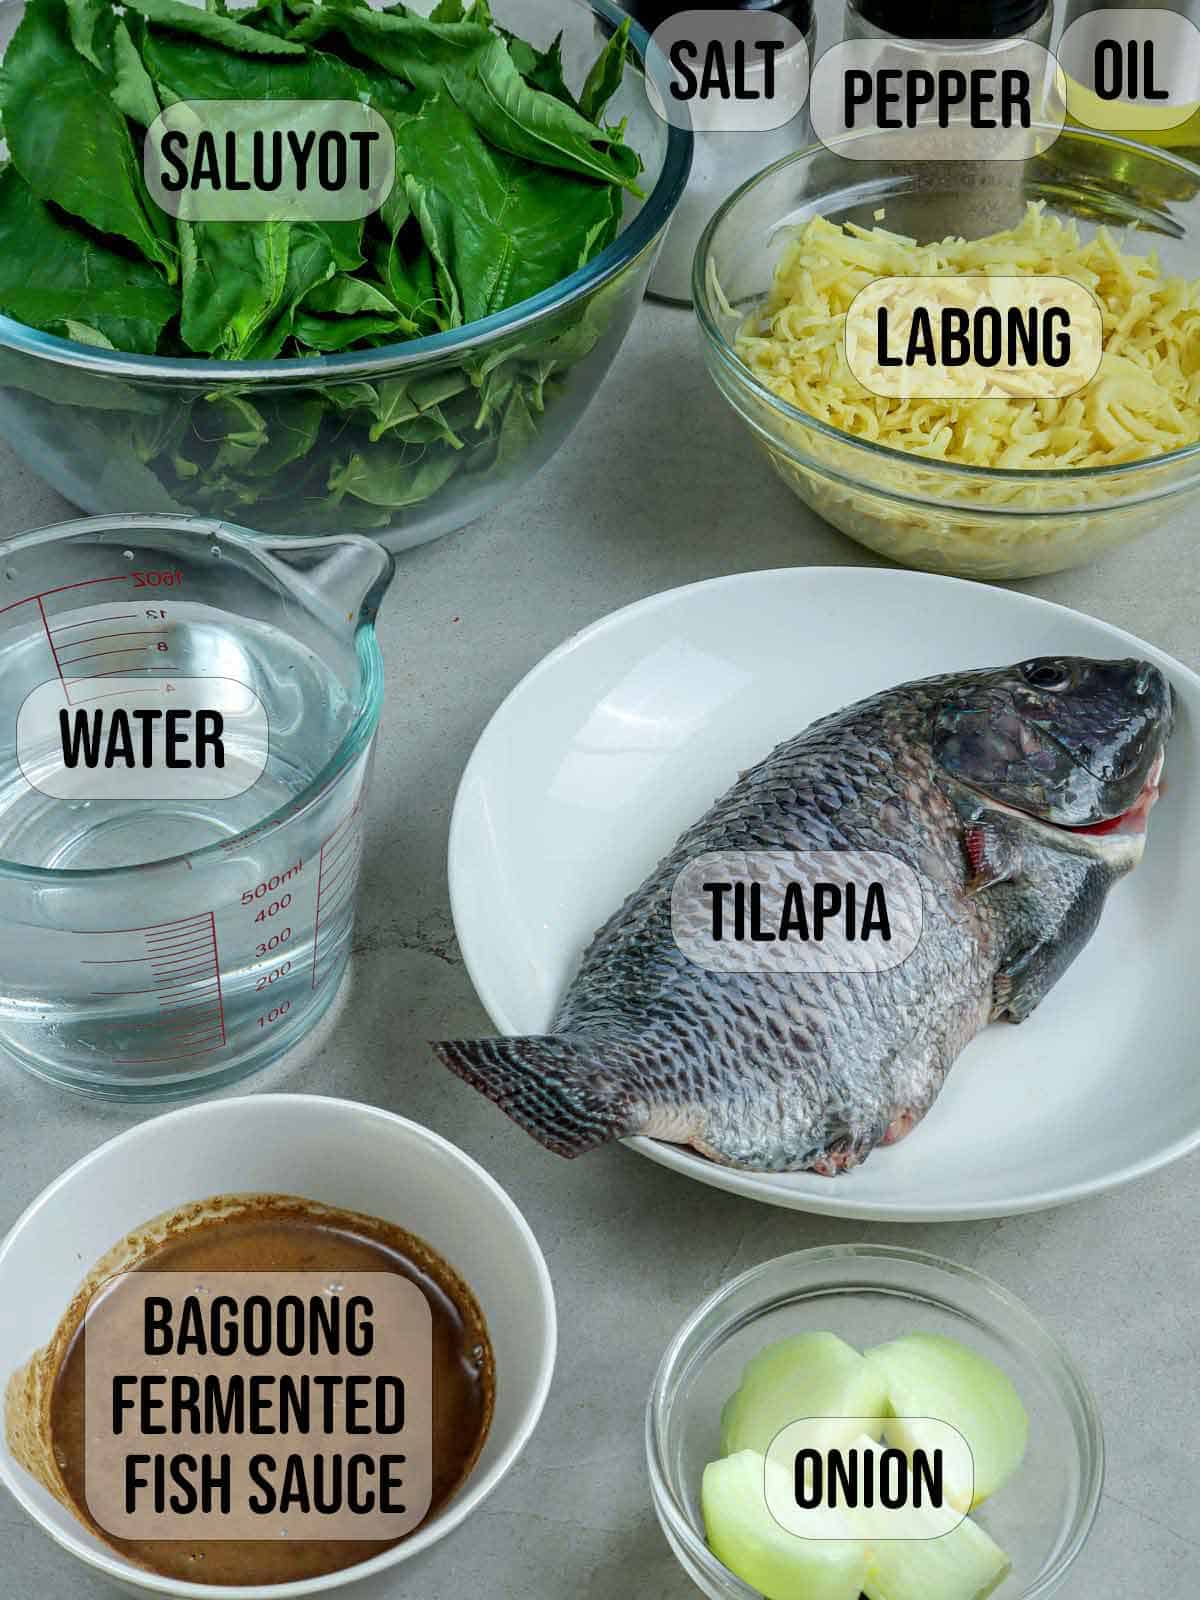 tilapia, onion, bamboo shoot, jute leaves, water, bagoong isda, oil in bowls, and salt and pepper shakers in the background.